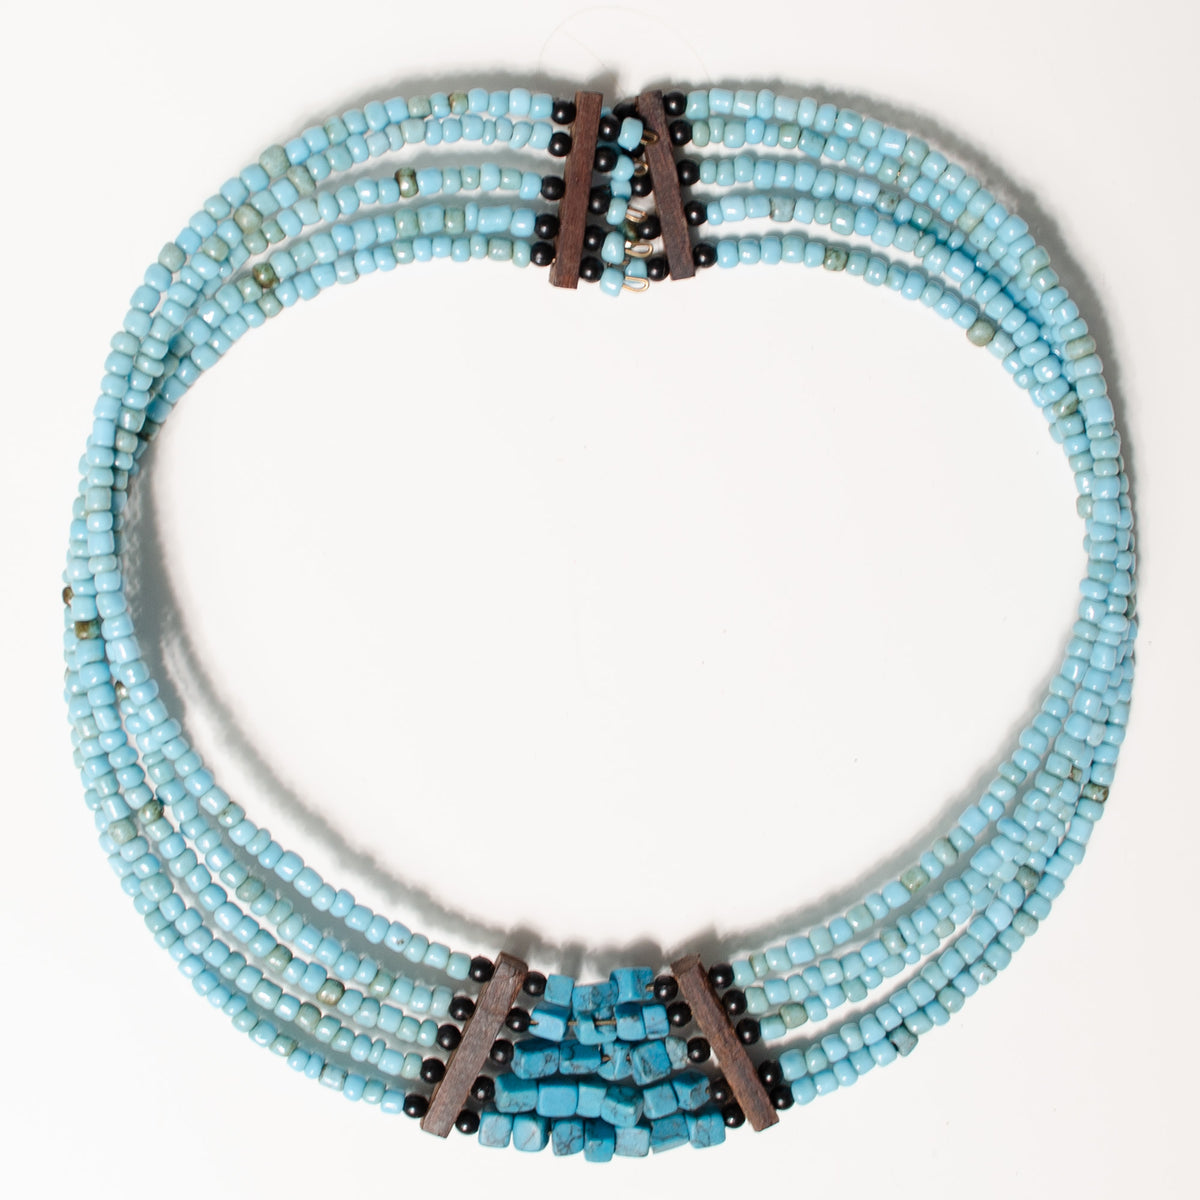 Turquoise Beaded Choker Necklace